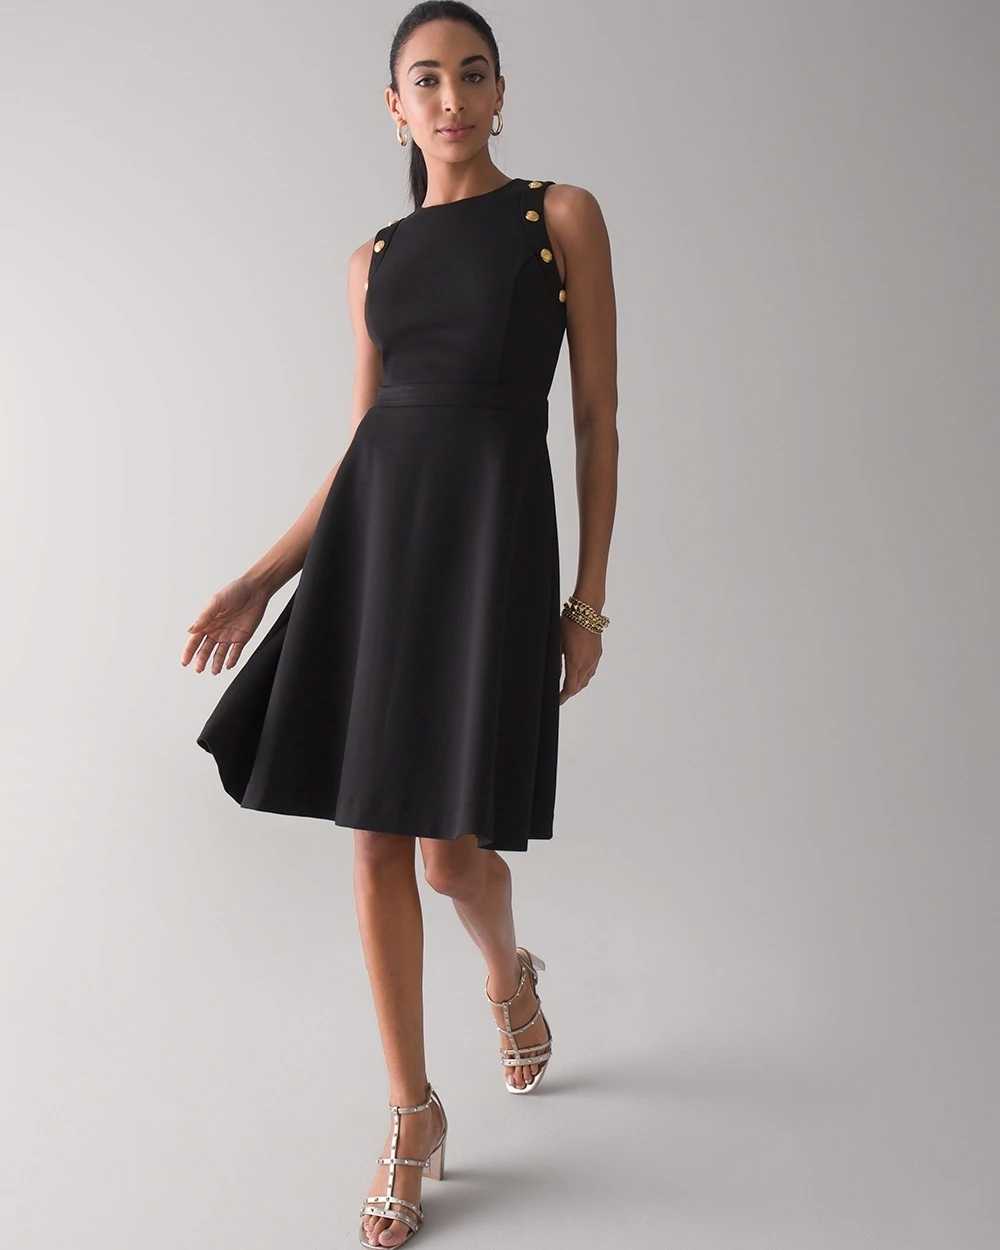 Petite Sleeveless Ponte Fit & Flare Dress With Crest Button Detail click to view larger image.